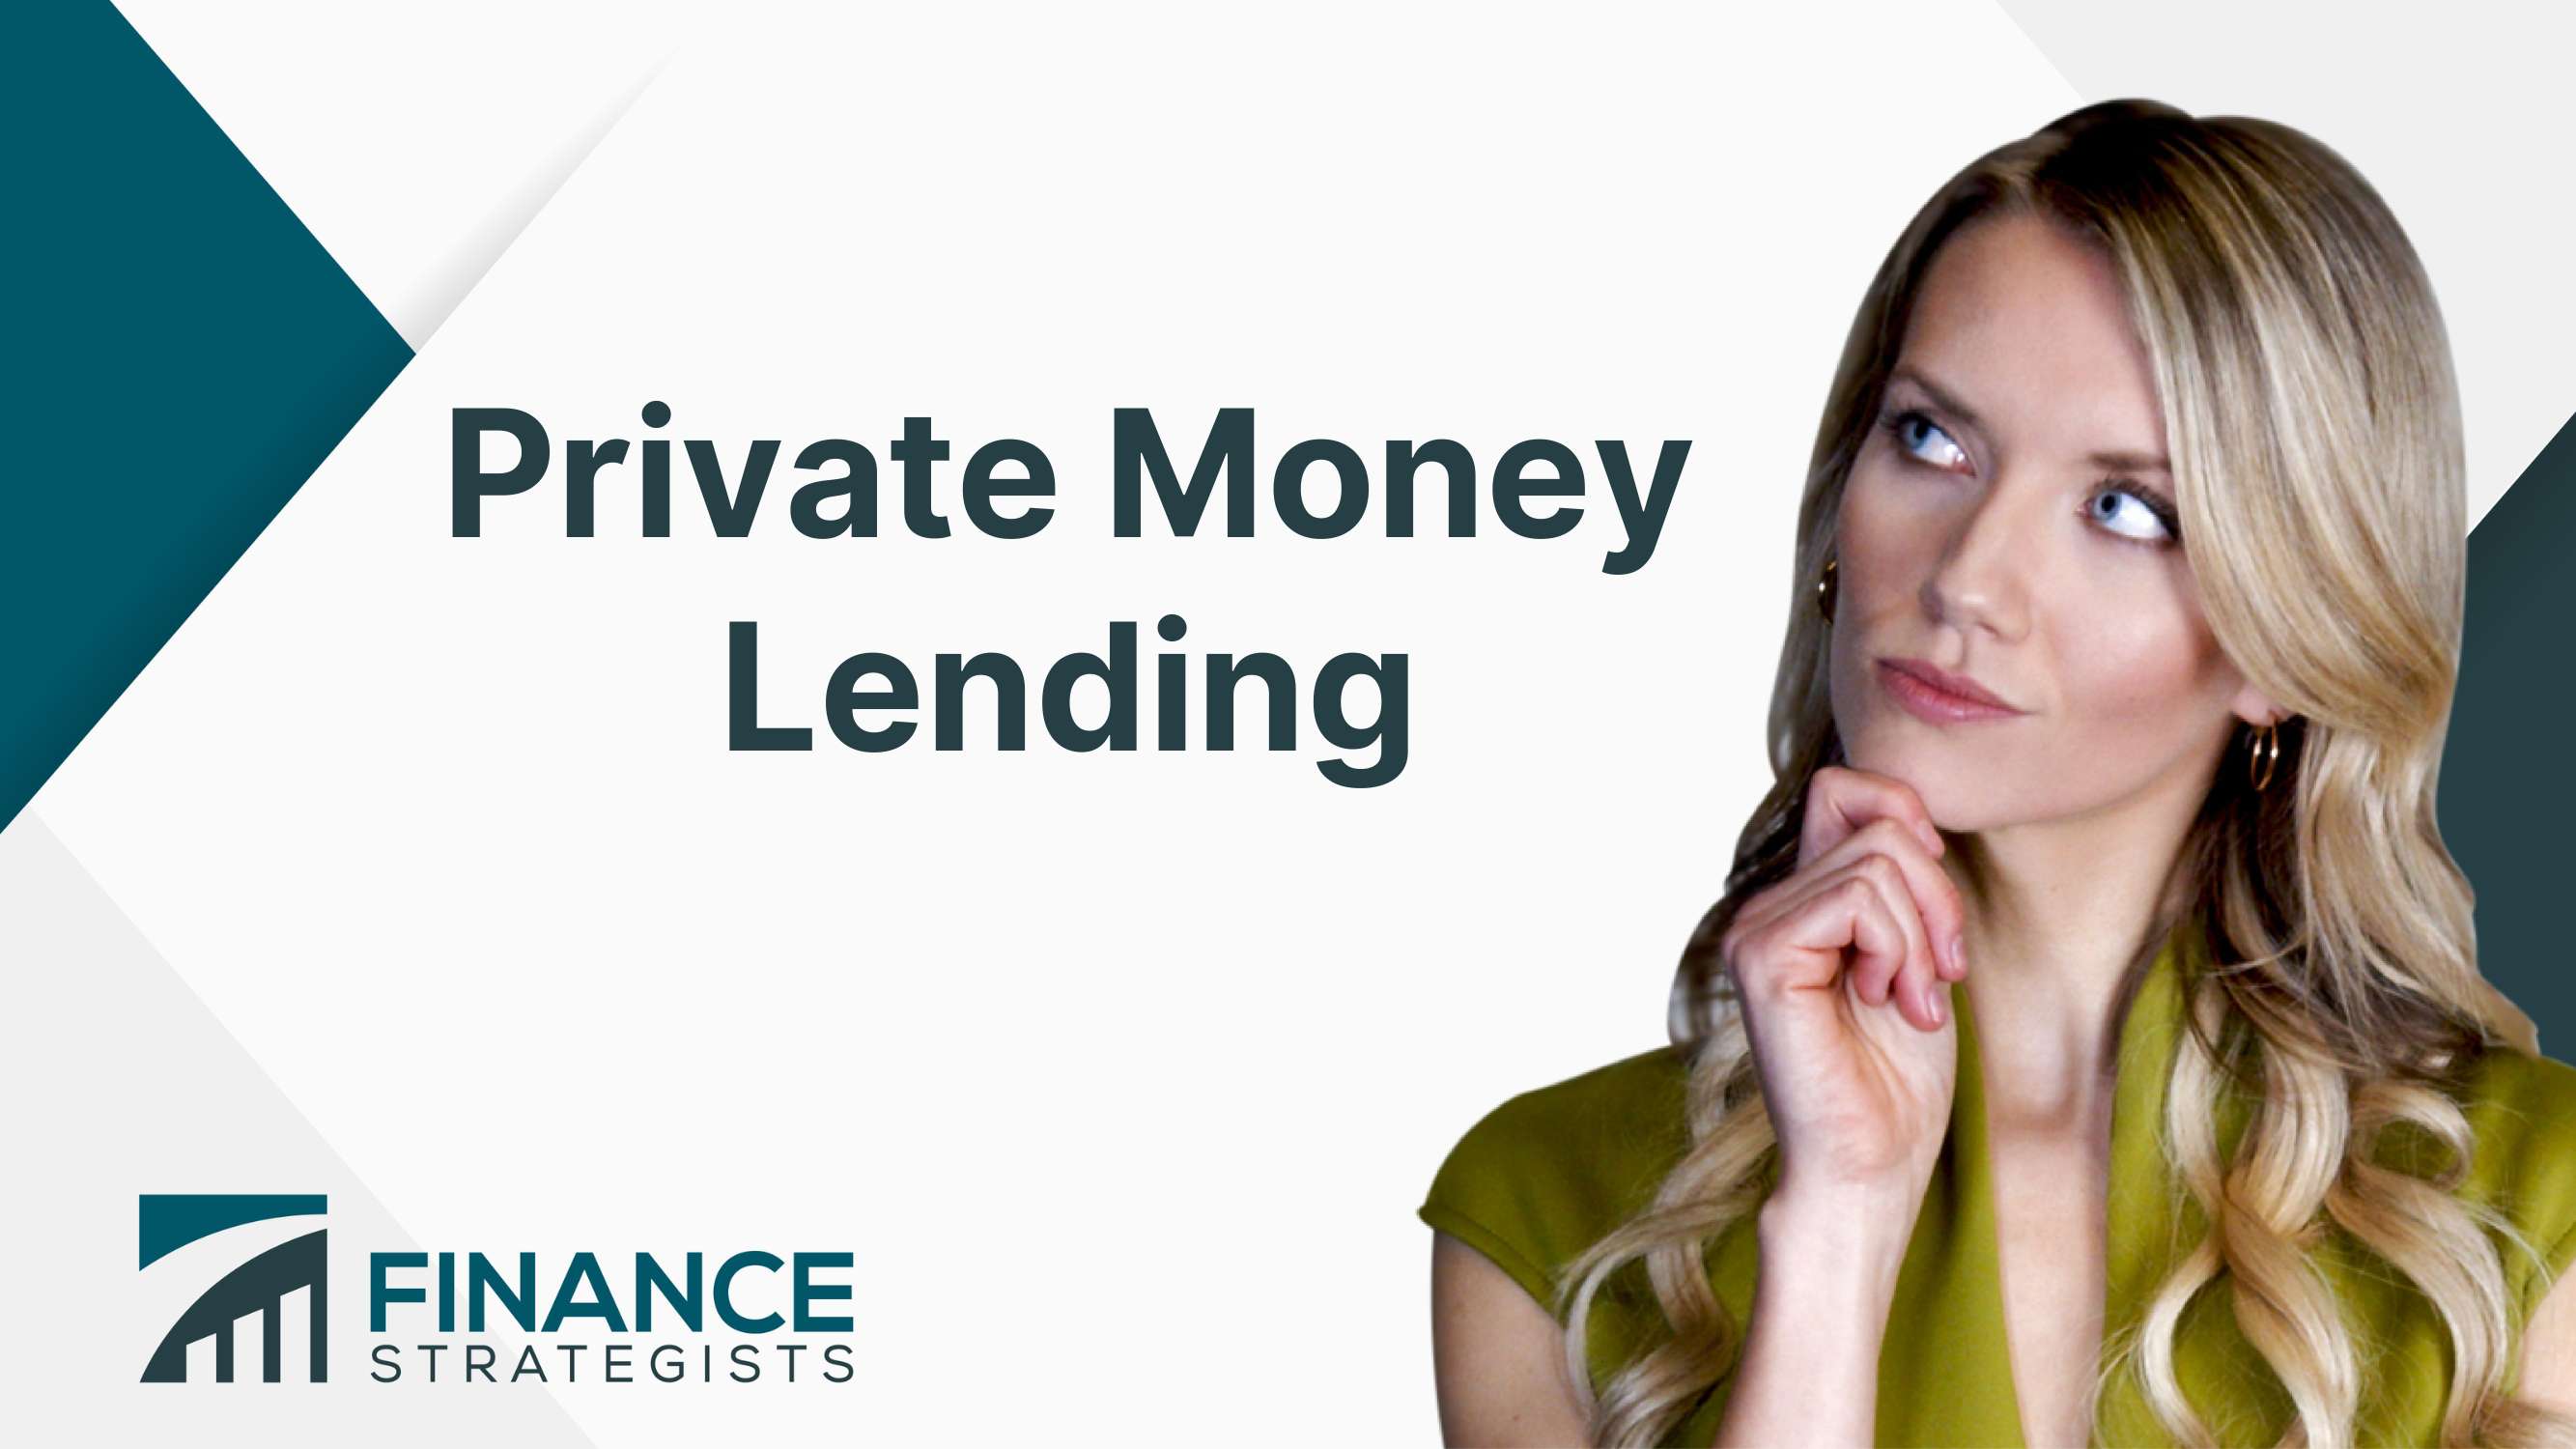 Private Money Lending | Definition, Types, Pros, & Cons